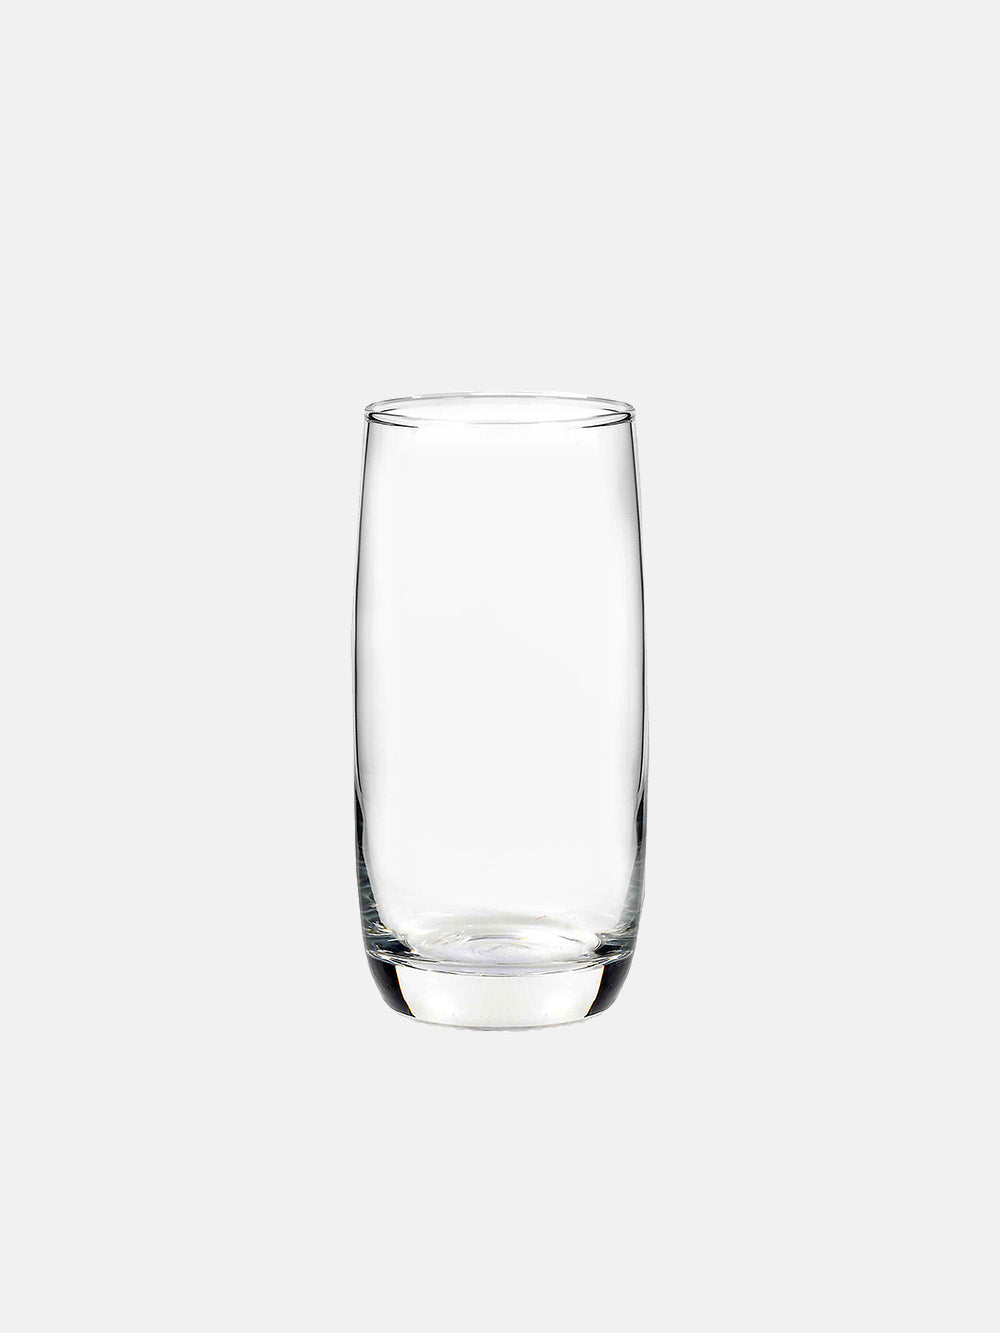 Ivory drinking glass